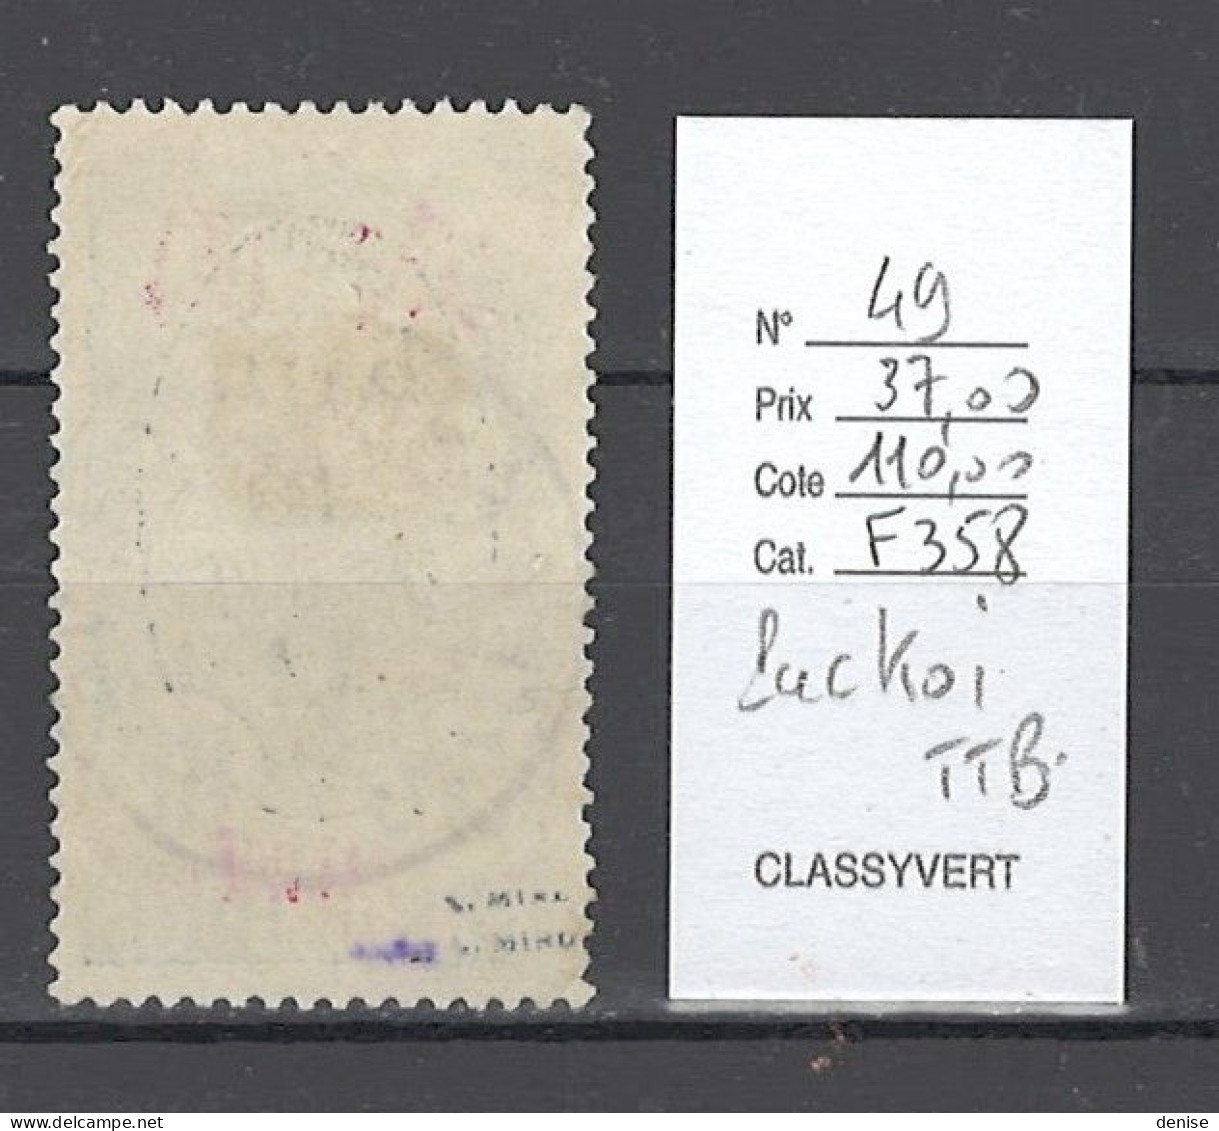 Packhoi - Chine Française - Yvert 49  -TTB - Signé Miro - Used Stamps